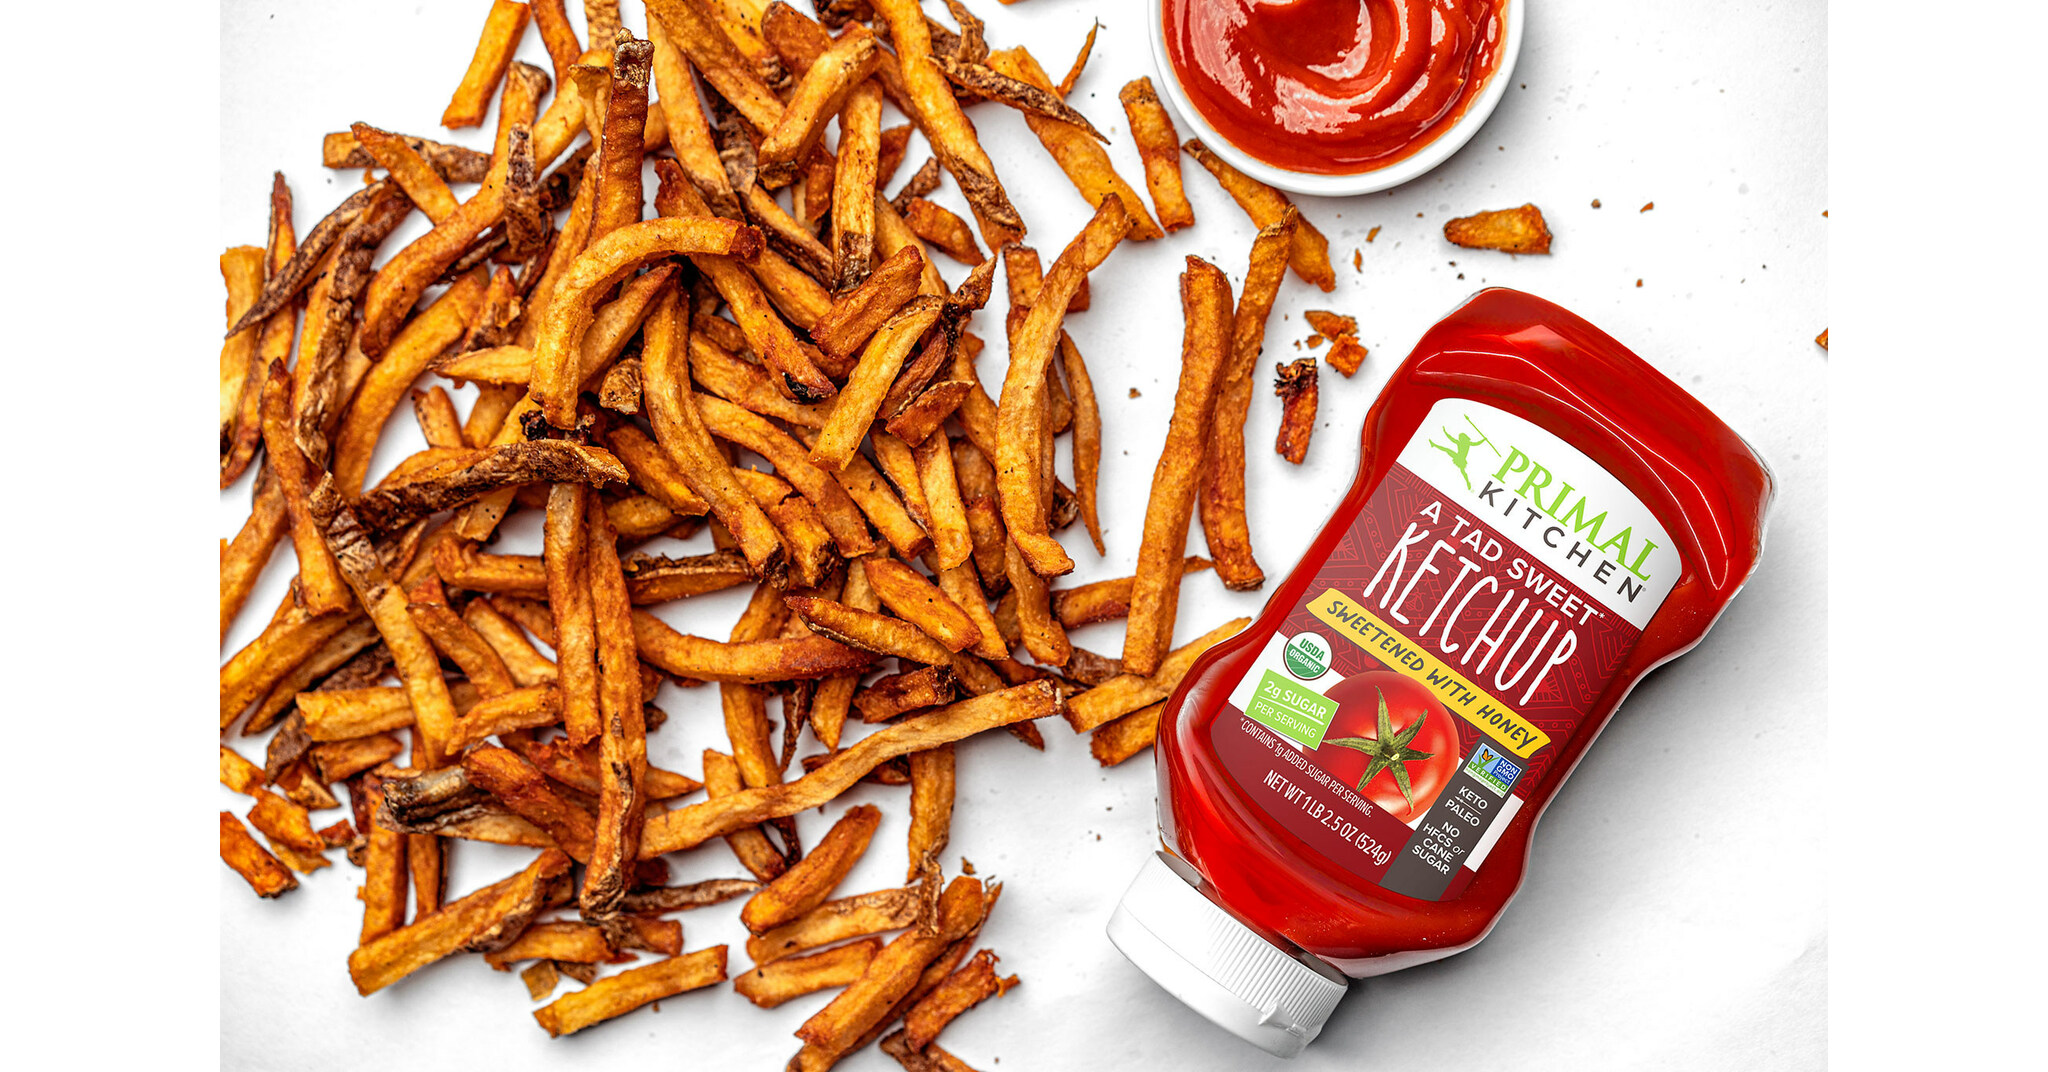 https://mma.prnewswire.com/media/2051789/Primal_Kitchen_A_Tad_Sweet_Ketchup_with_Fries.jpg?p=facebook